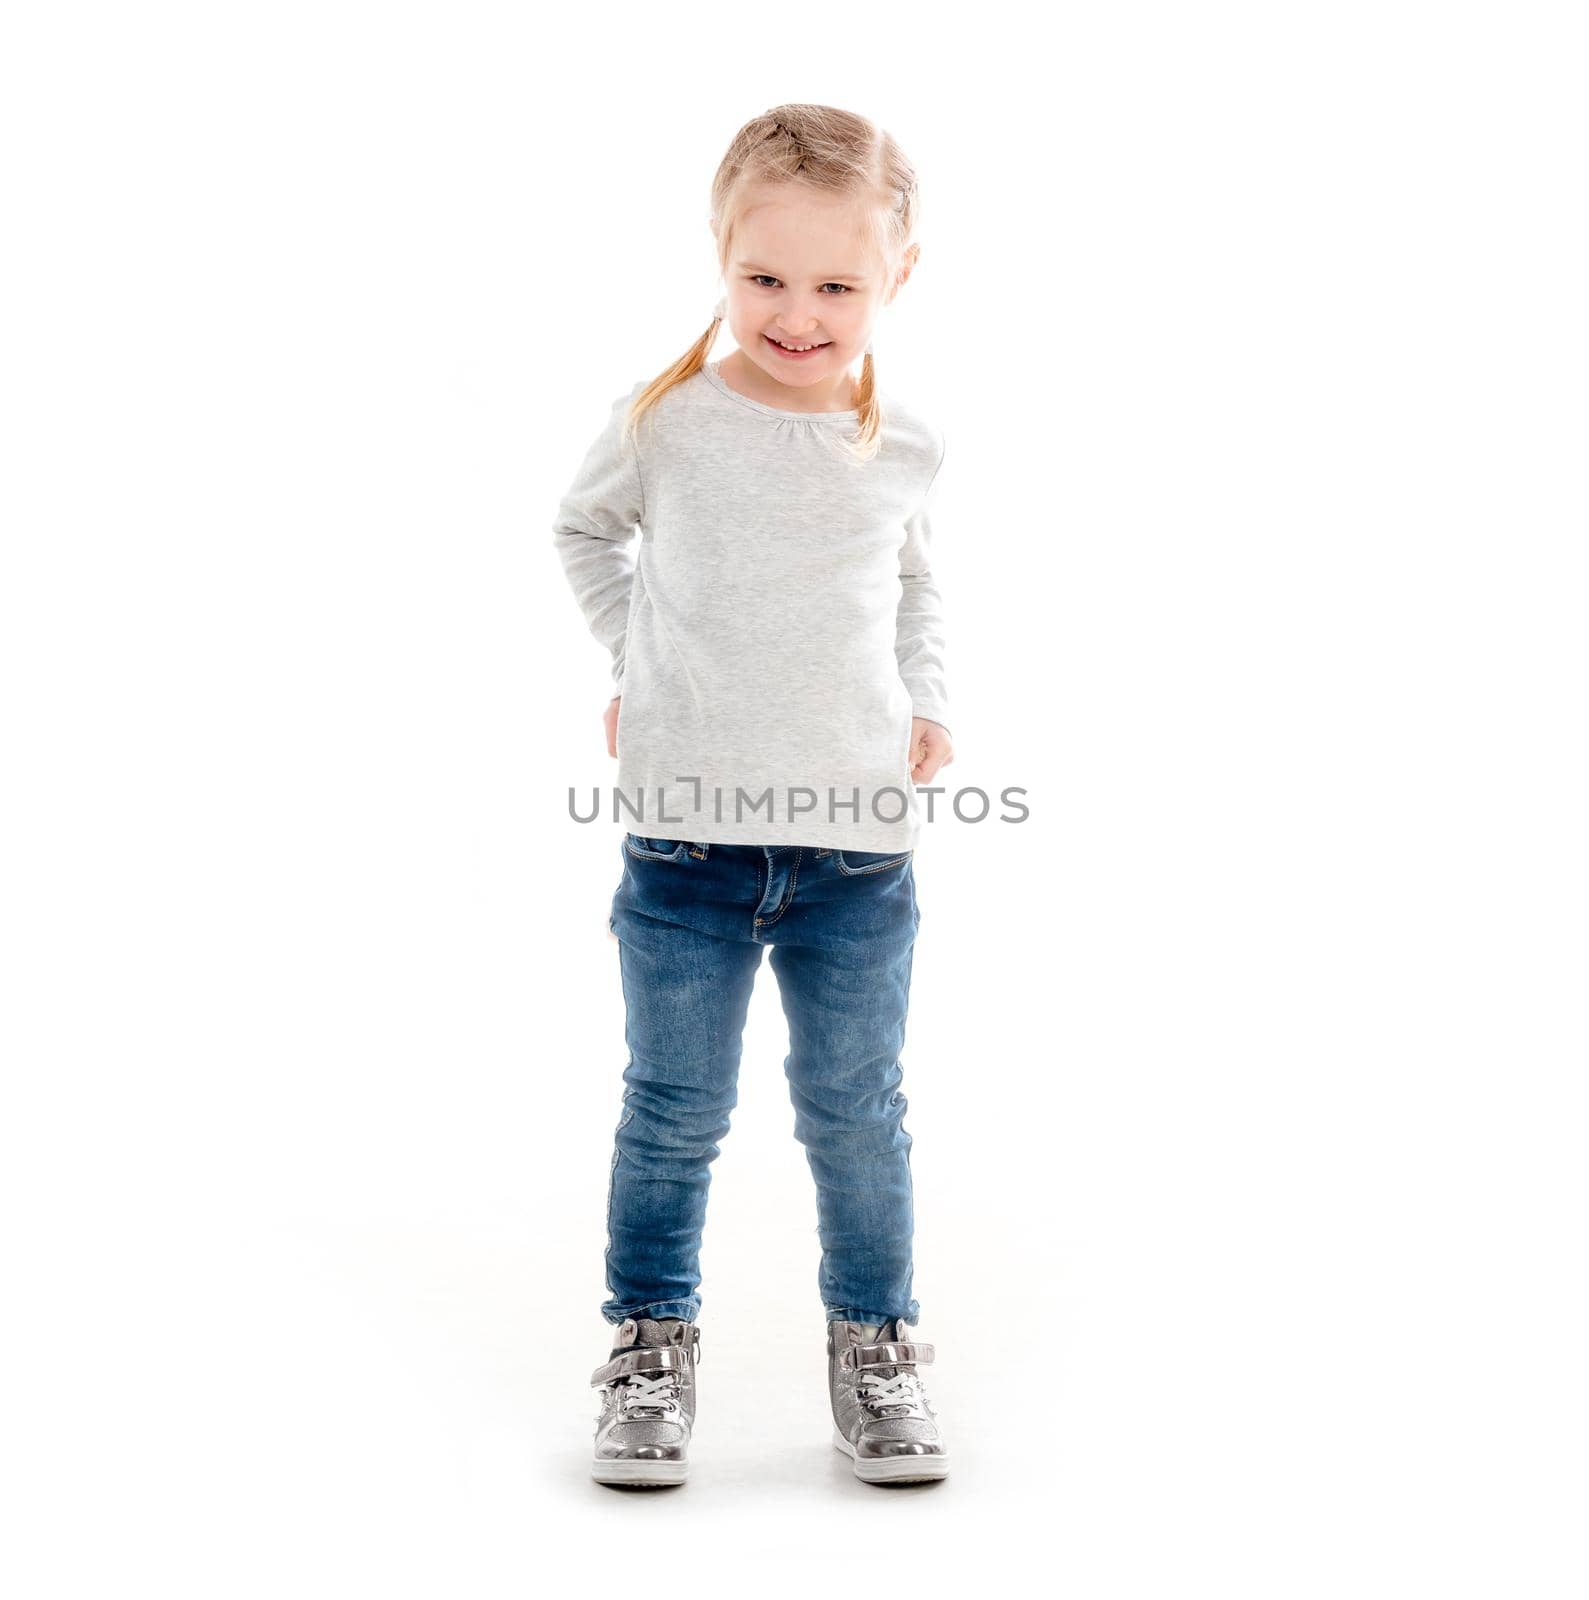 Lovely emotions of little girl stadning isolated on white background, wearning jeans and silvery shirt